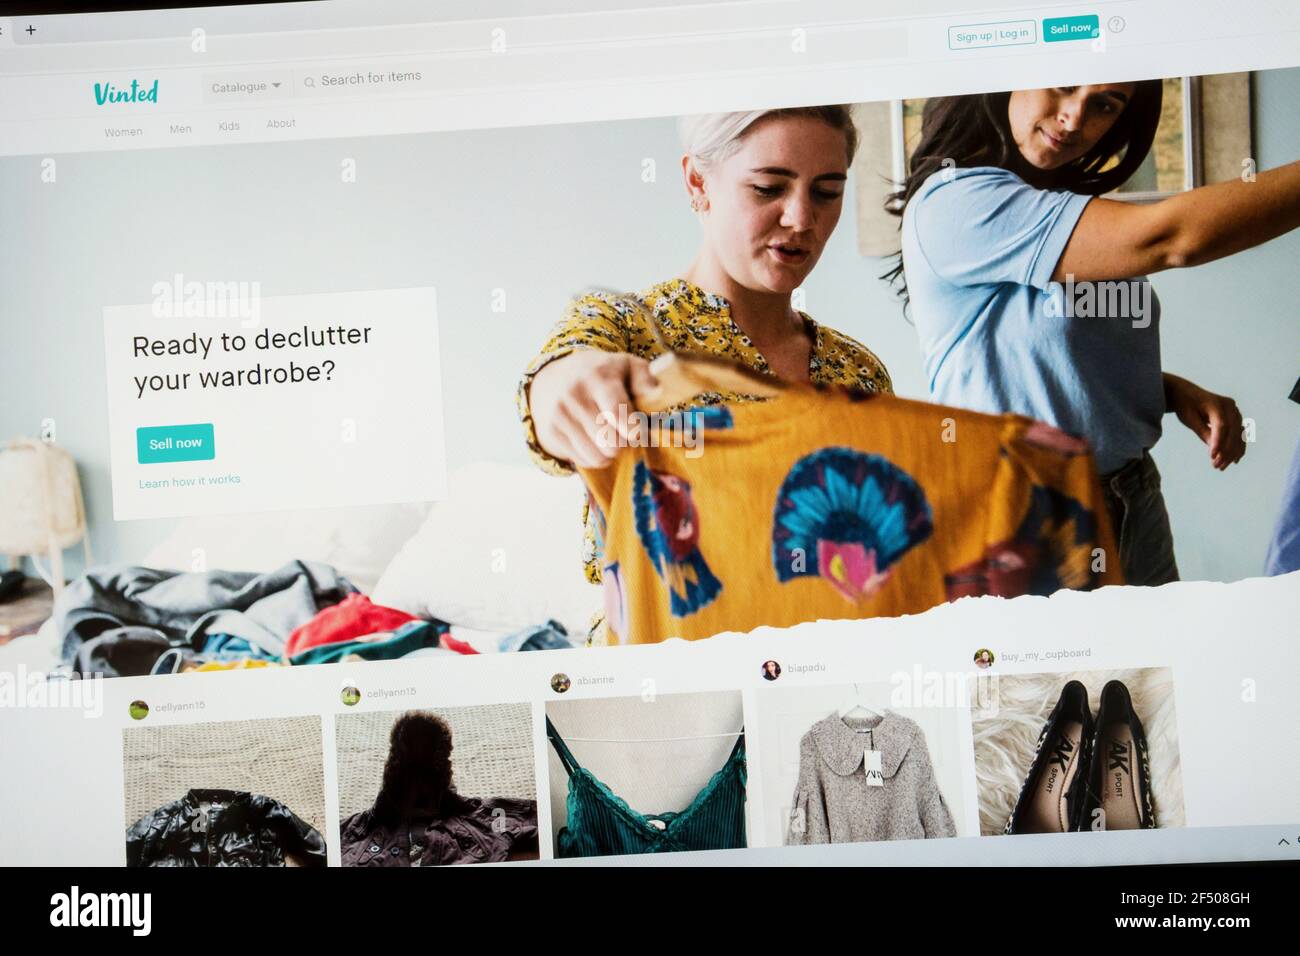 Homepage of the Vinted website, a Lithuanian based online marketplace for swapping, buying and selling secondhand clothing. Stock Photo